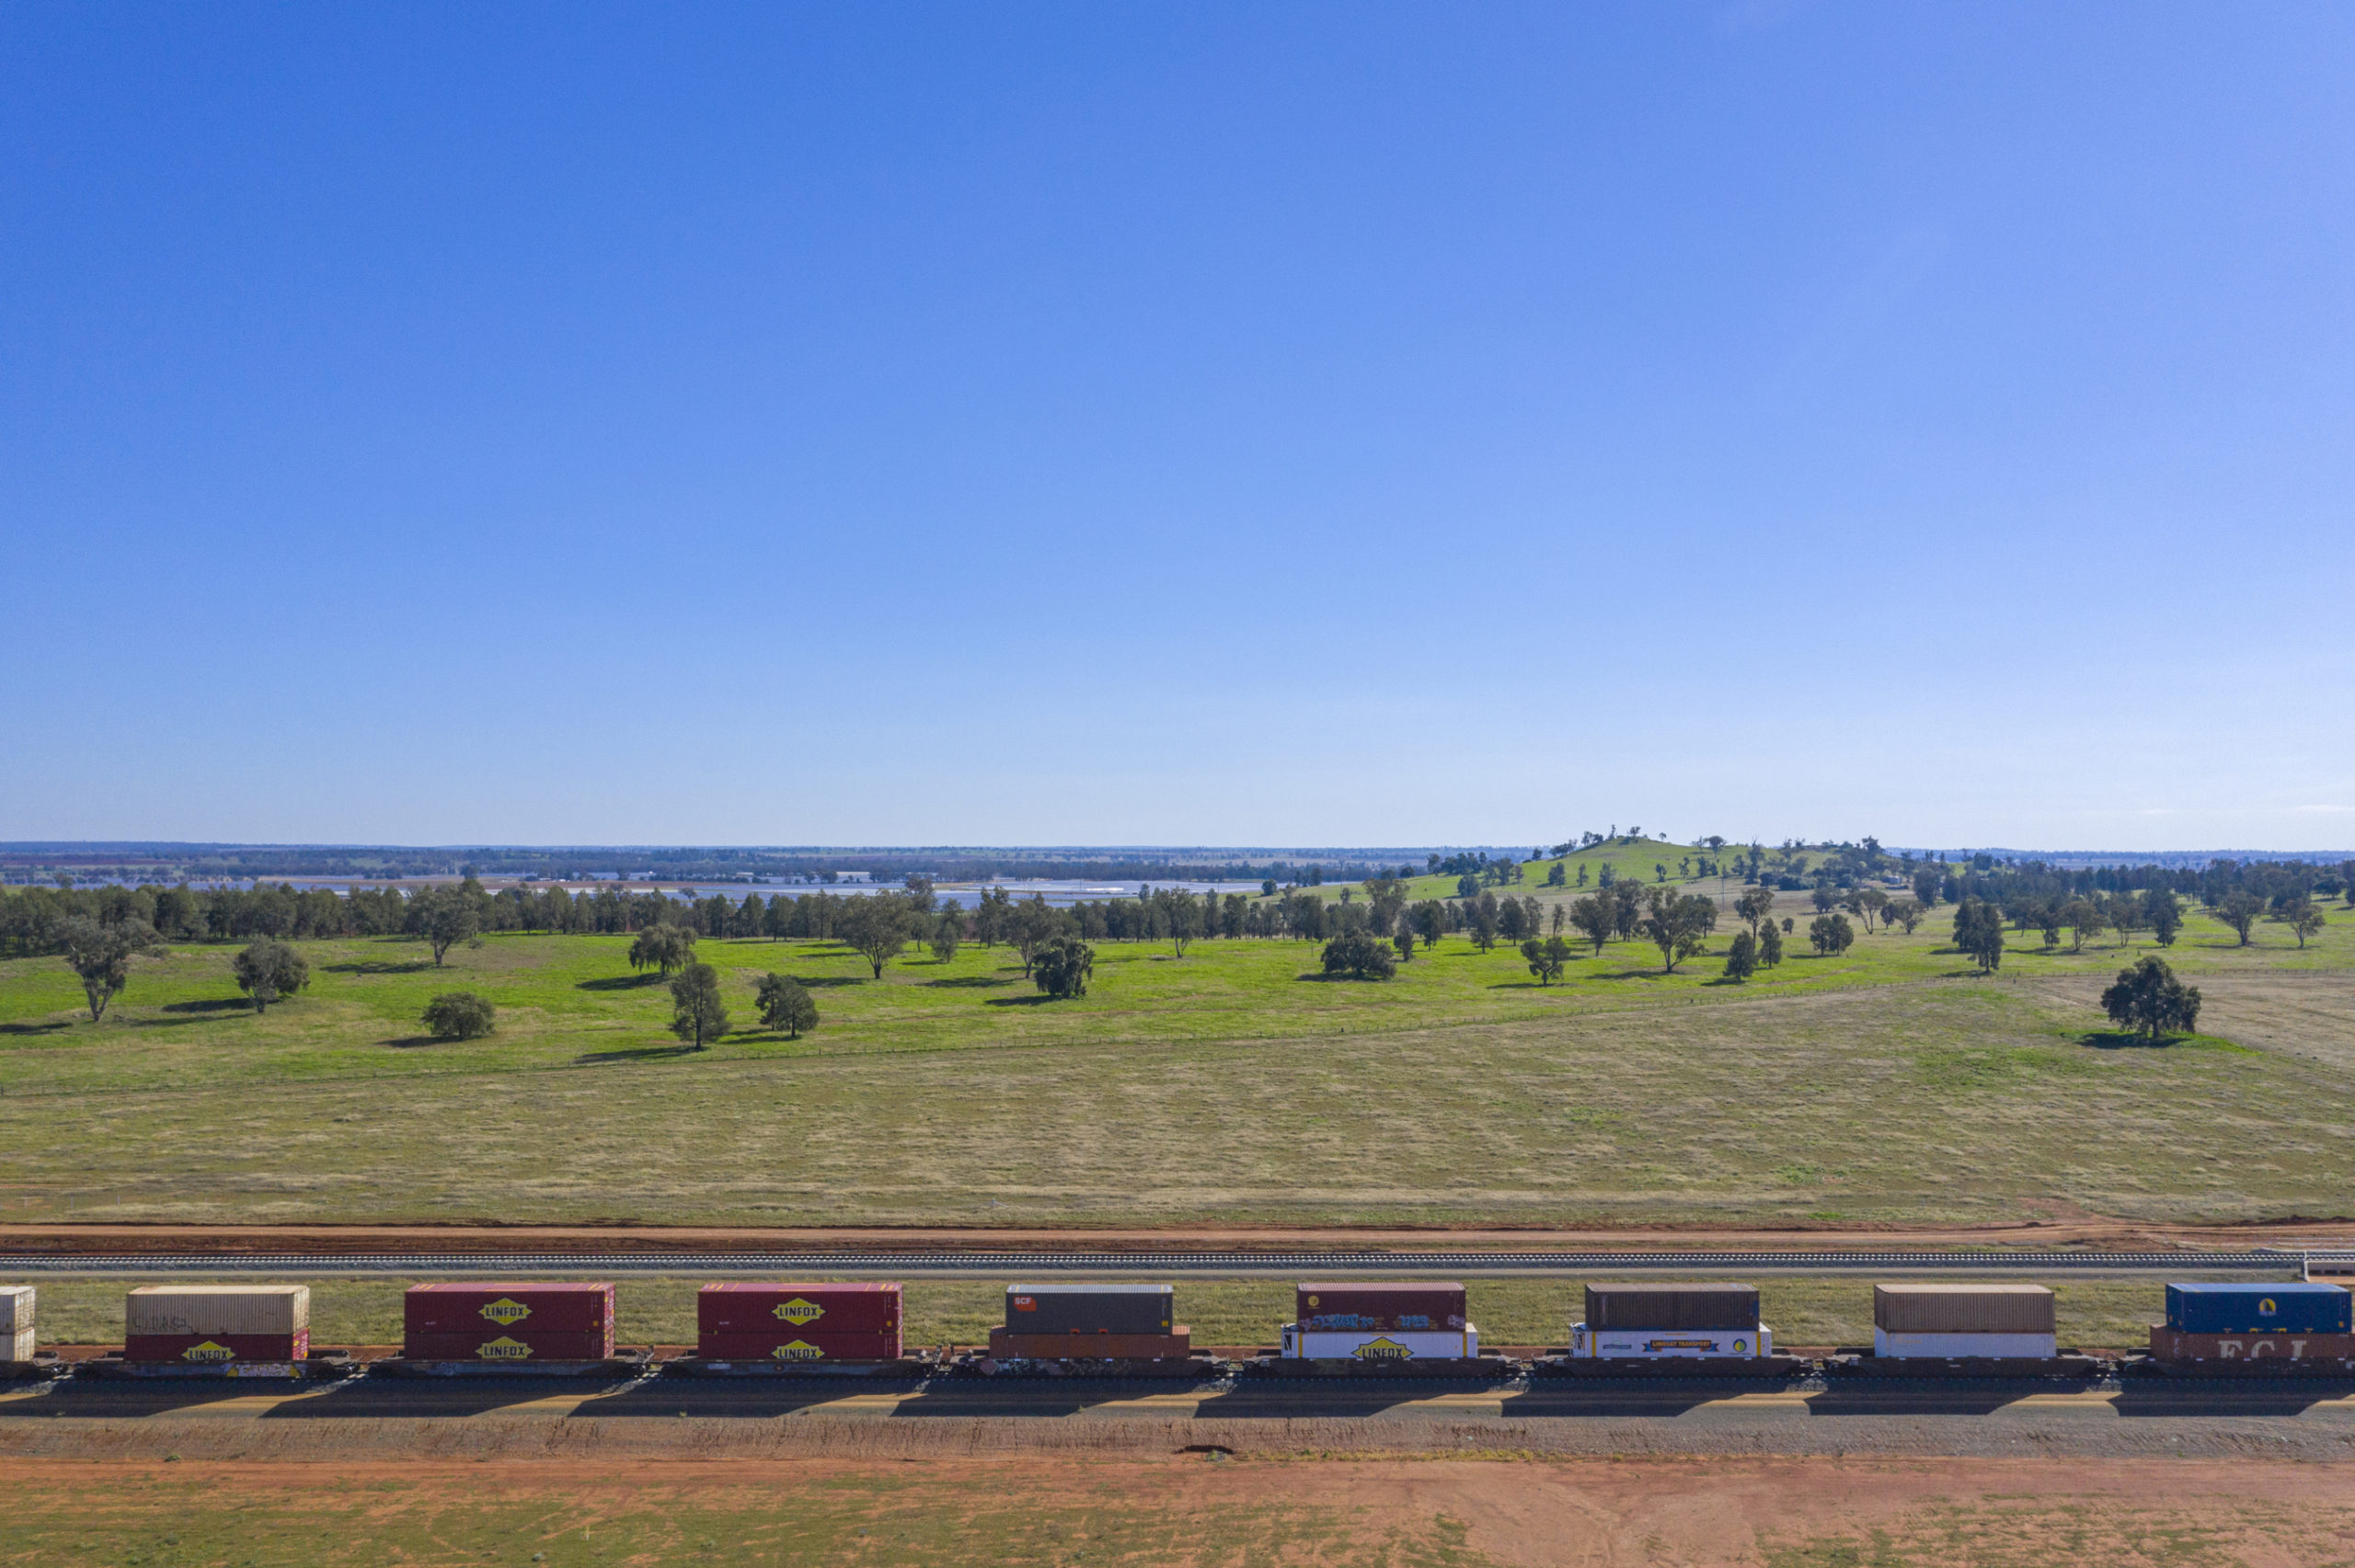 Aerial view of the double-stack container train travels through a rural area near Parkes, New South Wales.